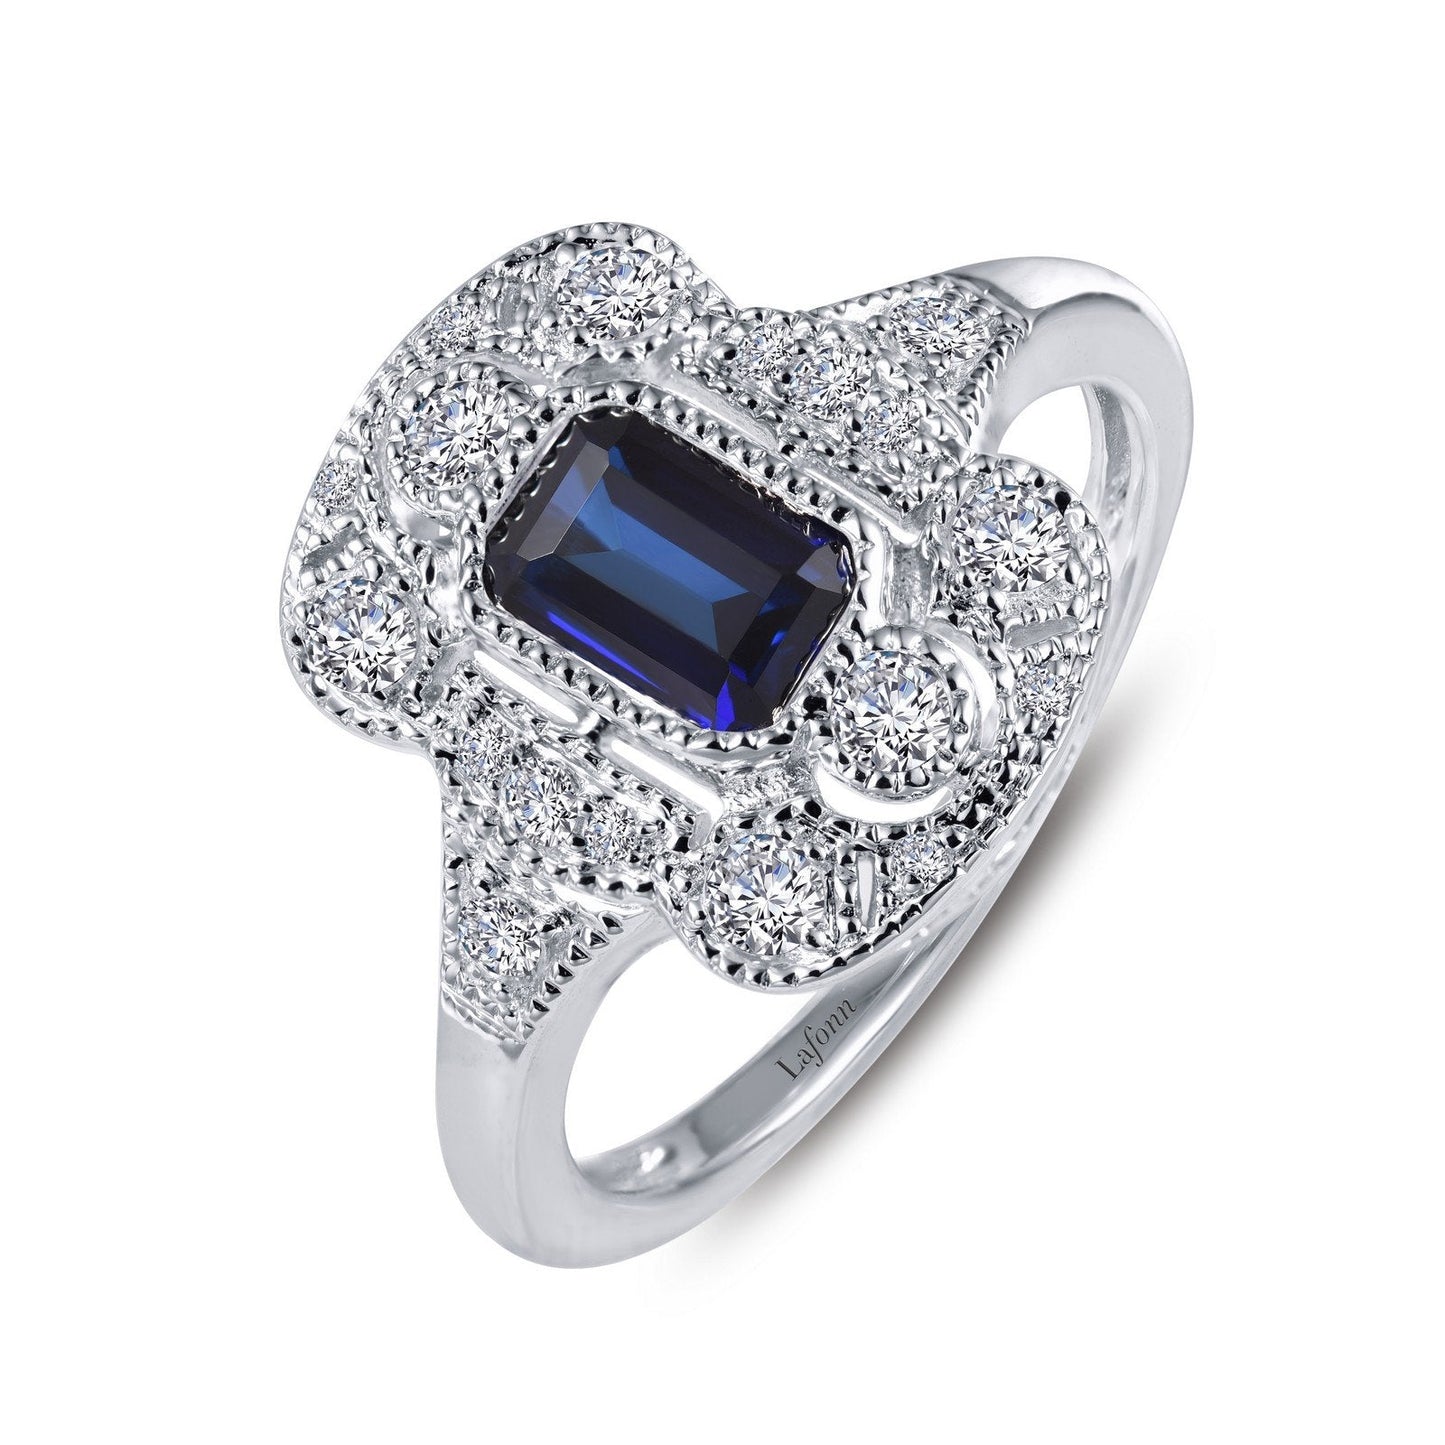 Lafonn Vintage Inspired Engagement Ring Sapphire RINGS Size 10 Platinum 0.99 CTS Width approx. 14mm